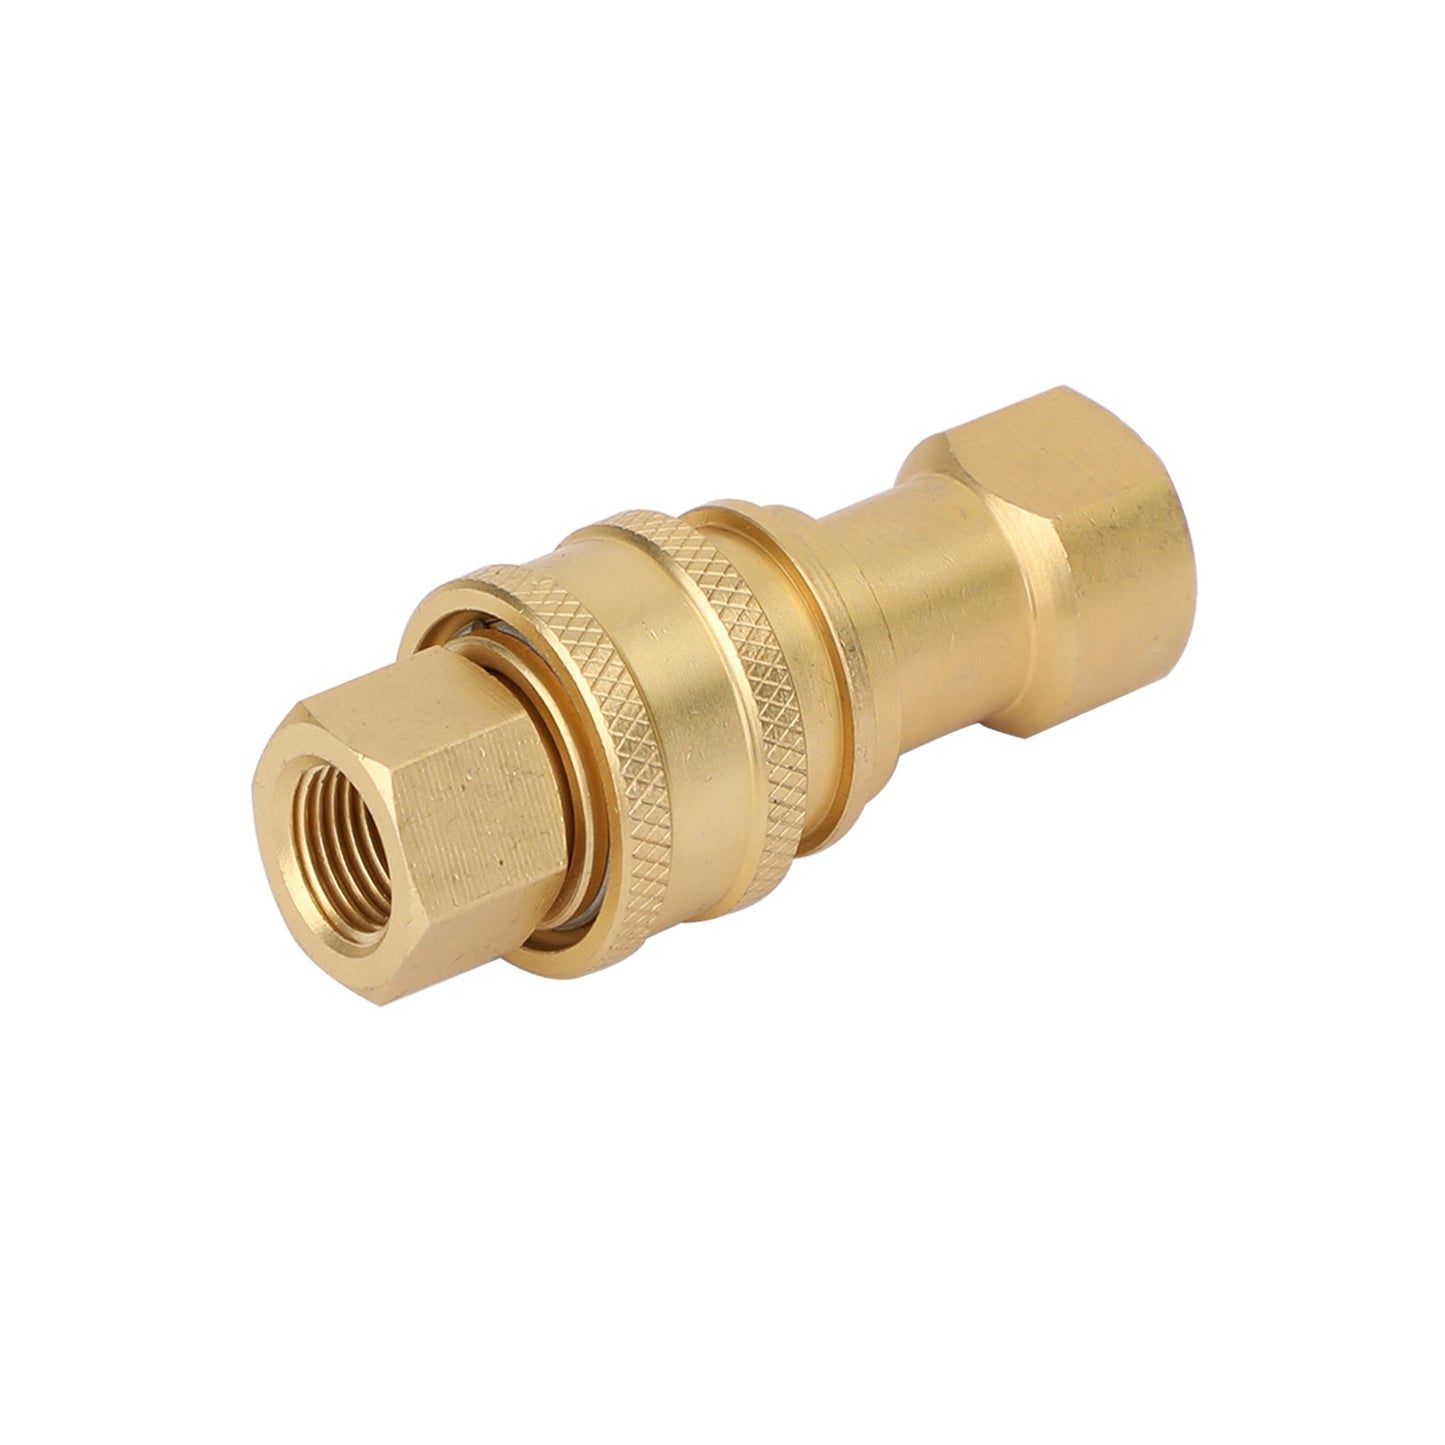 1 Sets 1/4" NPT ISO 7241-B Quick Disconnect Hydraulic Couplings/Couplers Brass